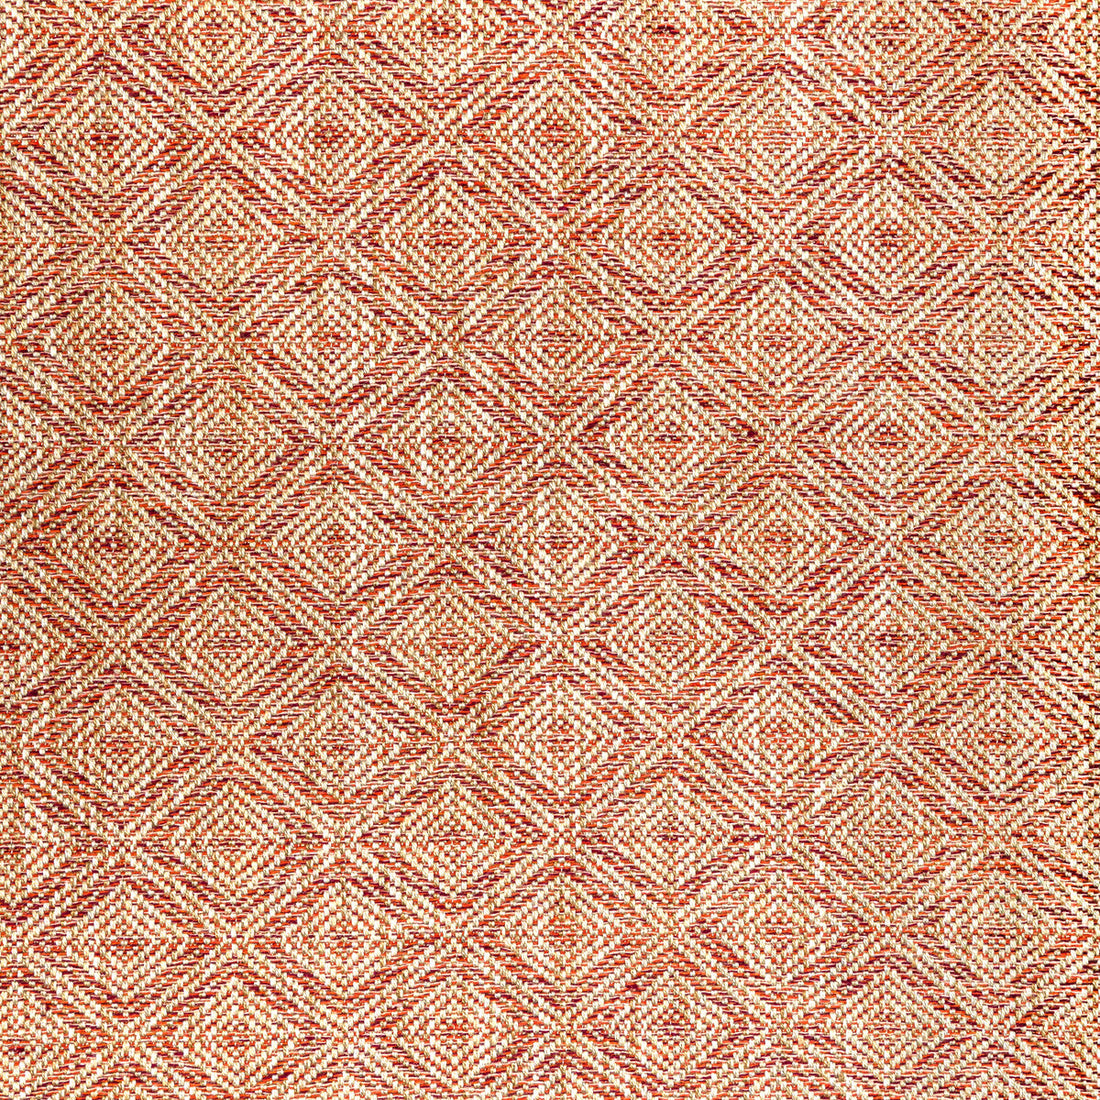 Calvin Weave fabric in spice color - pattern 8022114.24.0 - by Brunschwig &amp; Fils in the Lorient Weaves collection